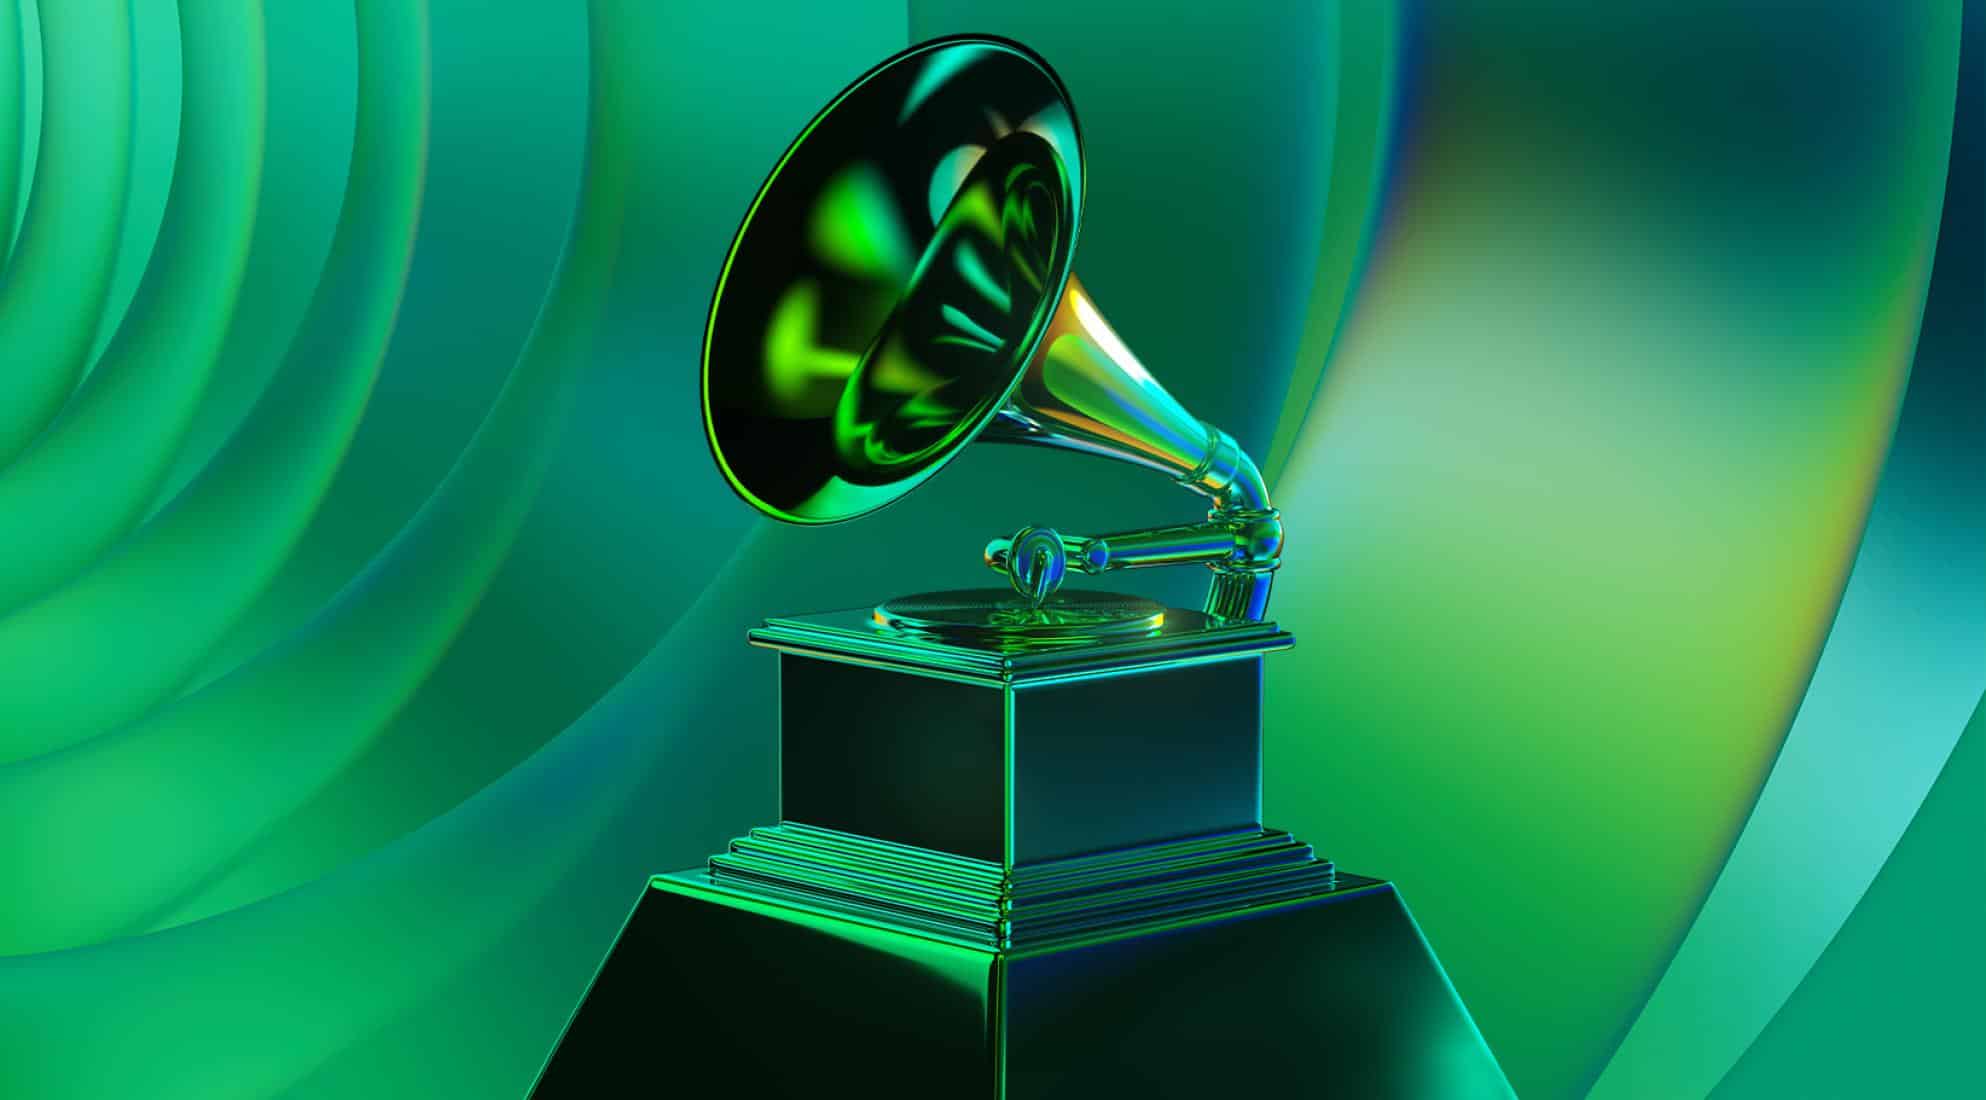 64th Annual Grammy Awards® Rescheduled To Sunday, April 3